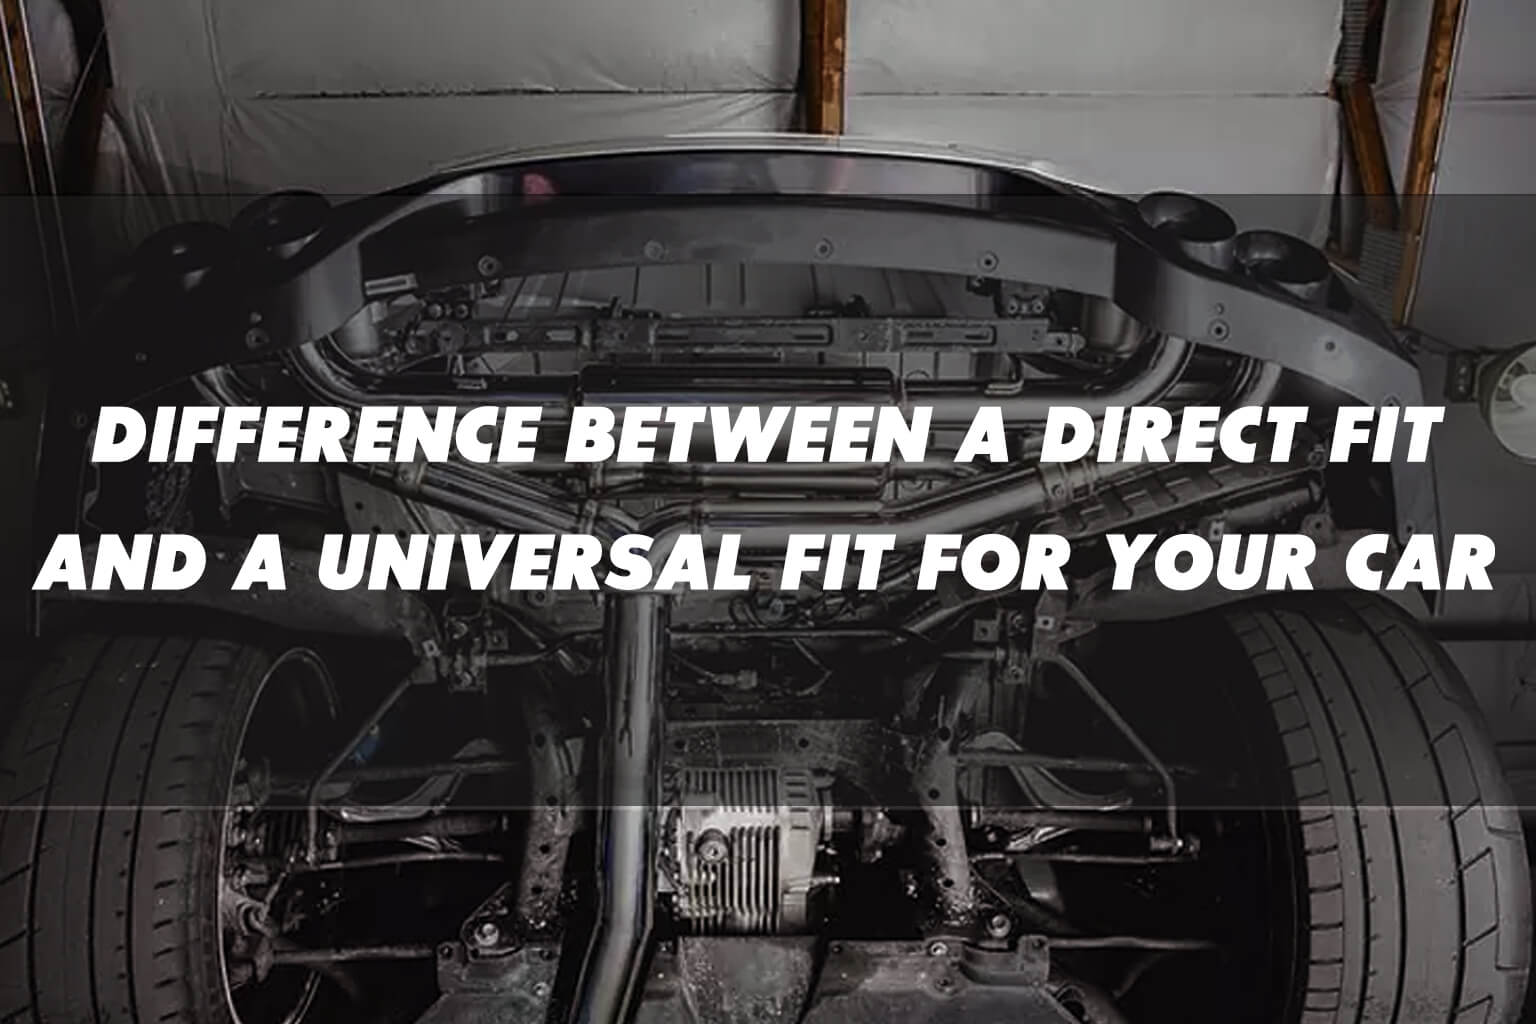 Difference Between a Direct Fit and a Universal Fit for Your Vehicle